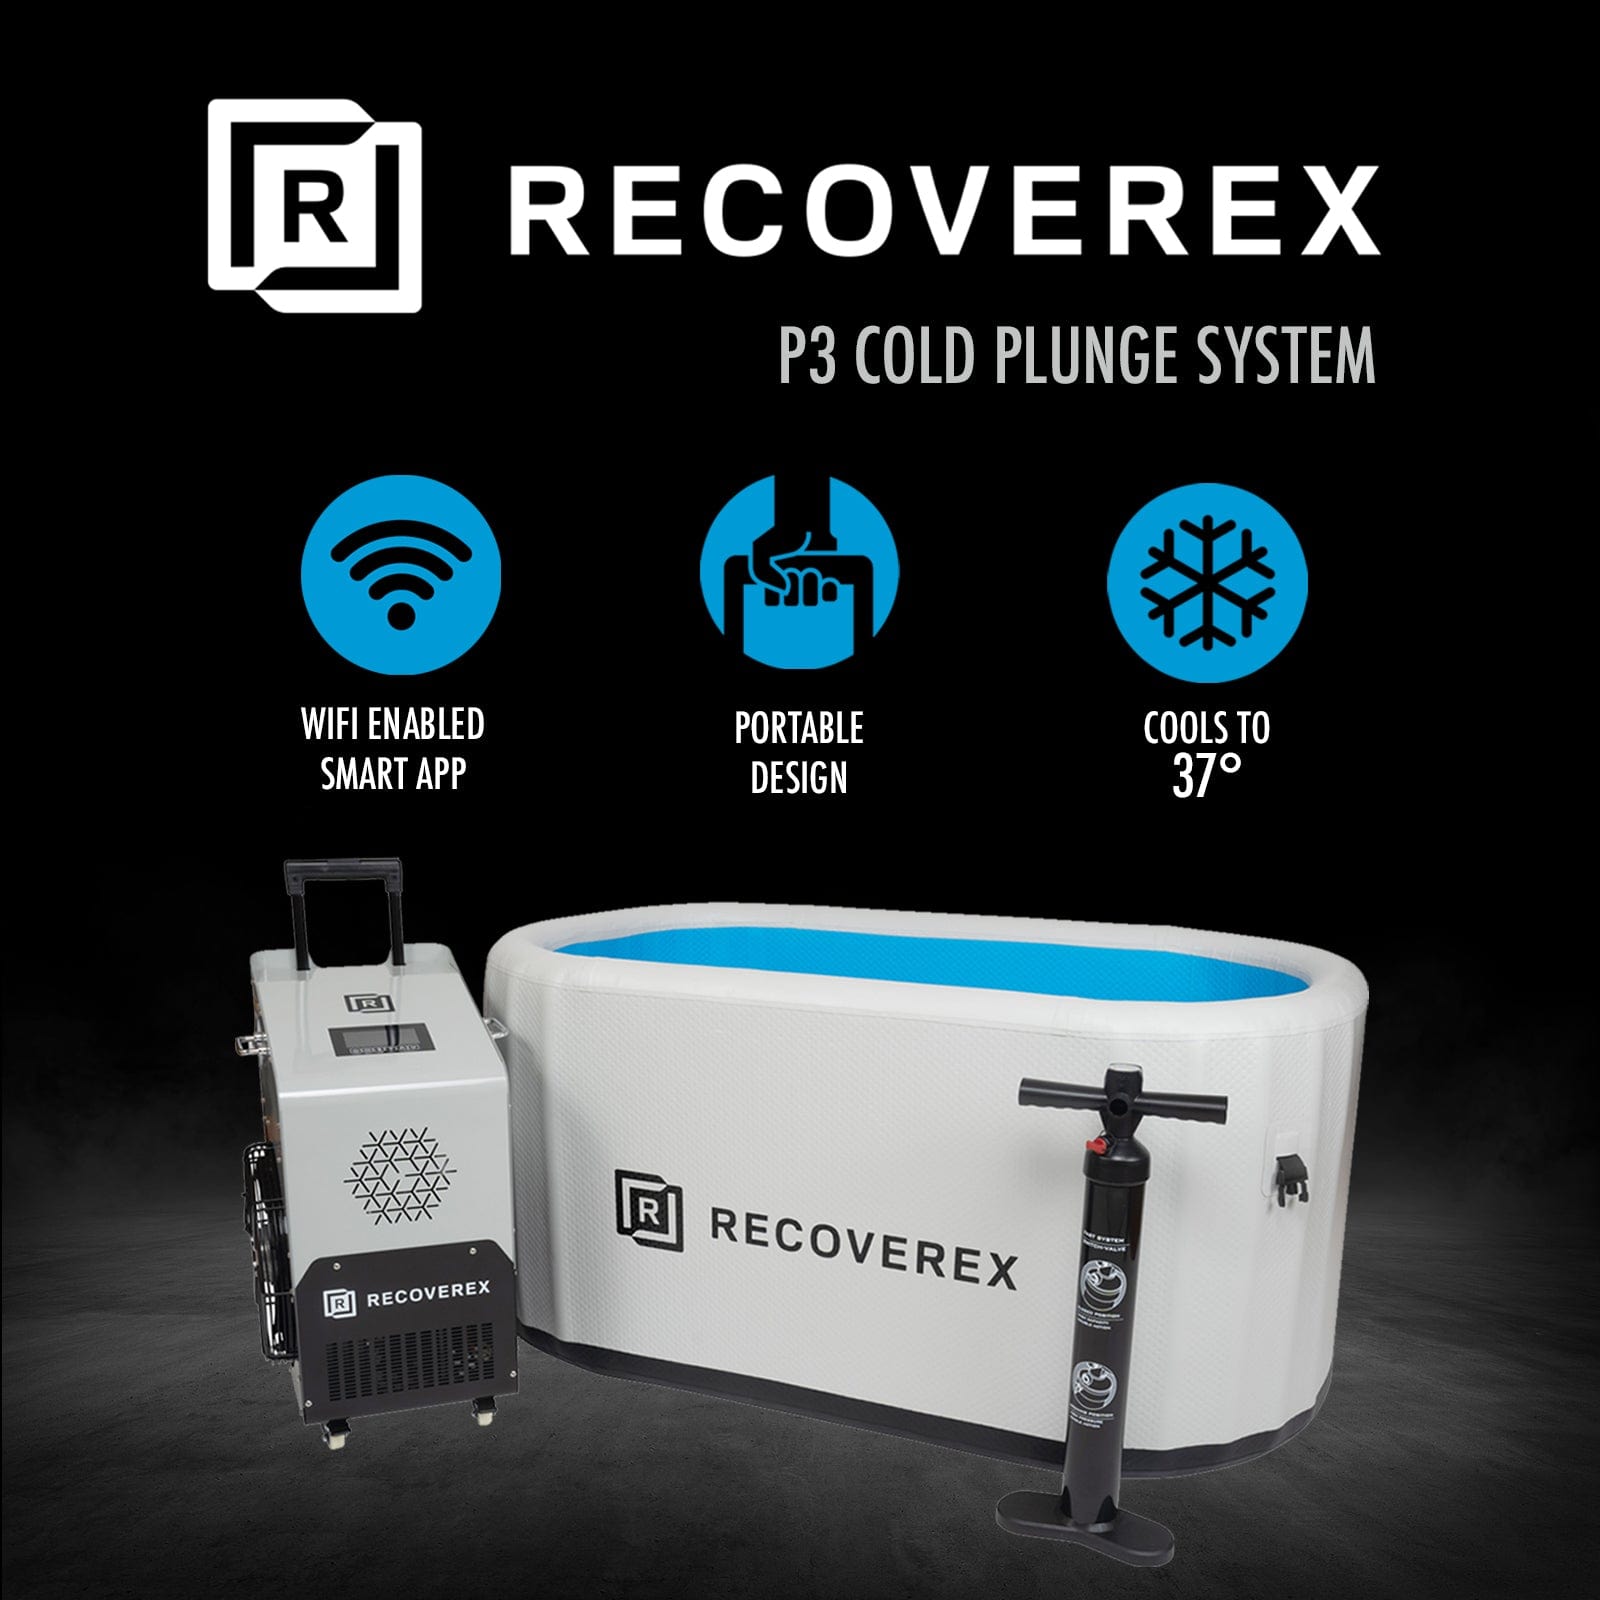 The Recoverex P3 - The Cold Plunge Store